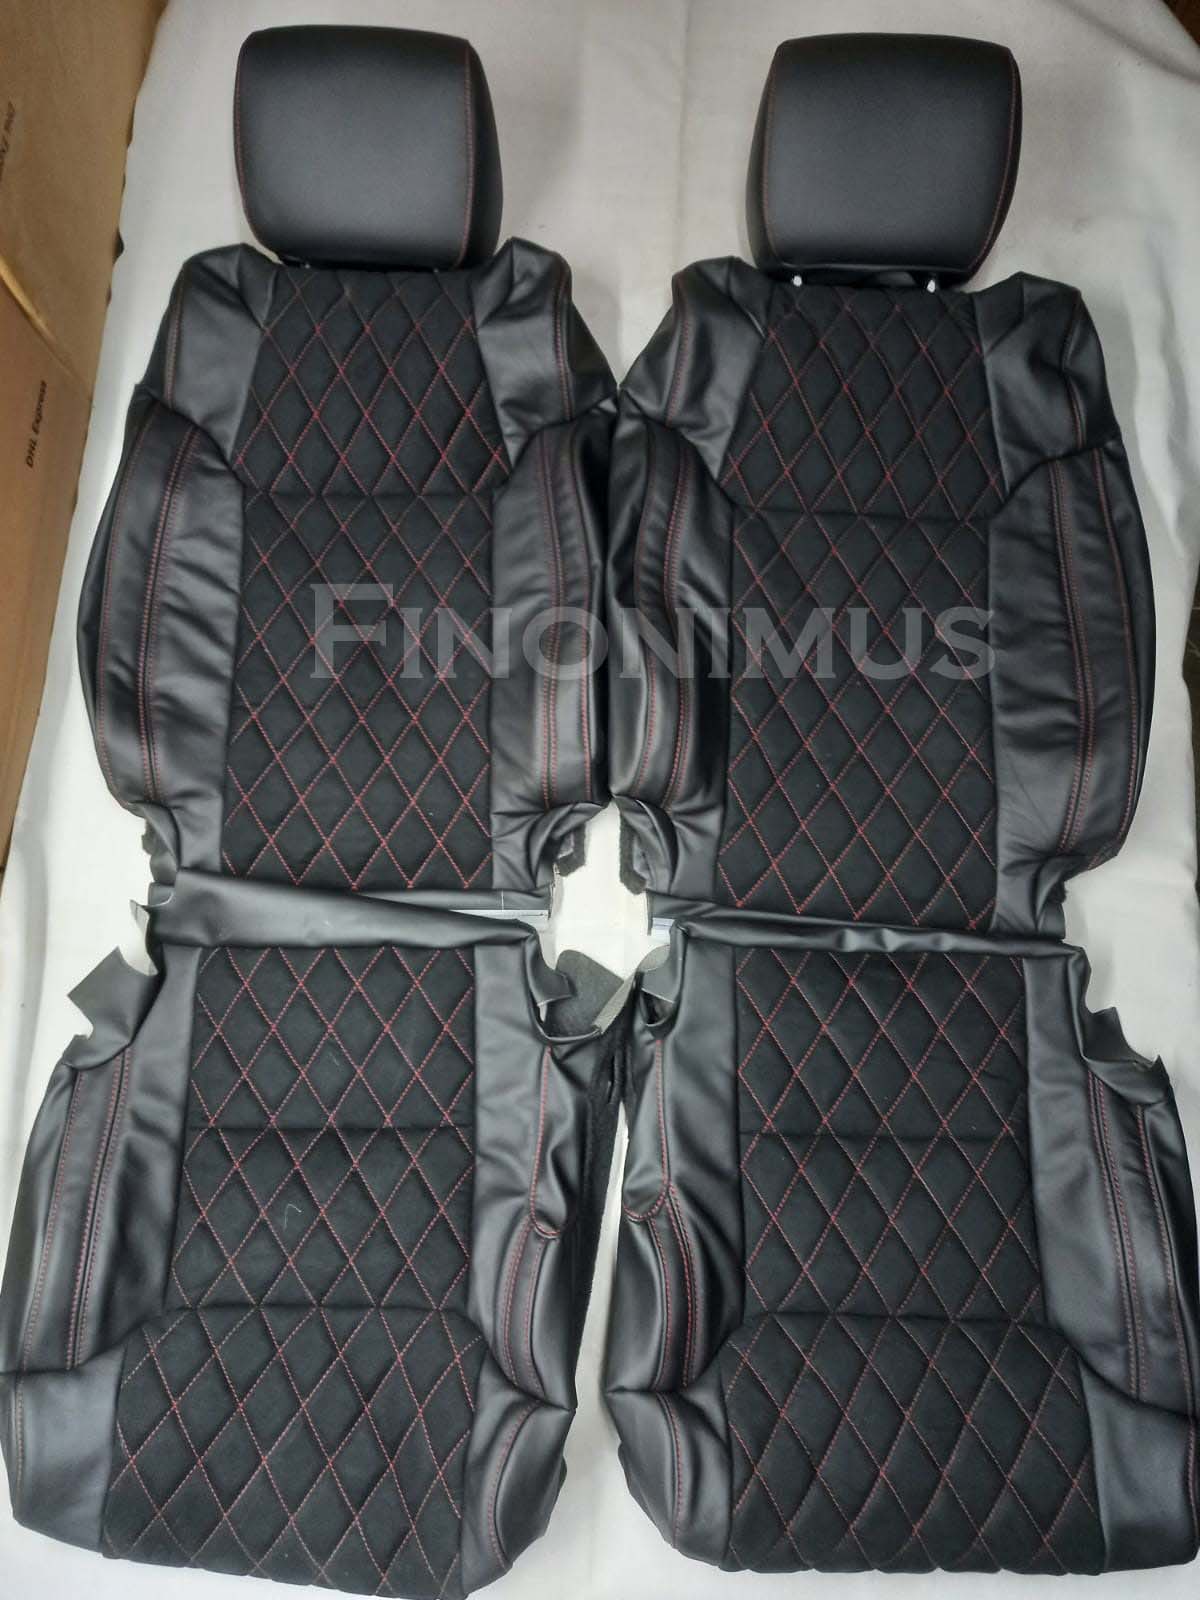 Toyota Tundra Genuine Leather with Alcantara/Suede Seat Cover Black (Year 2014 to 2021)